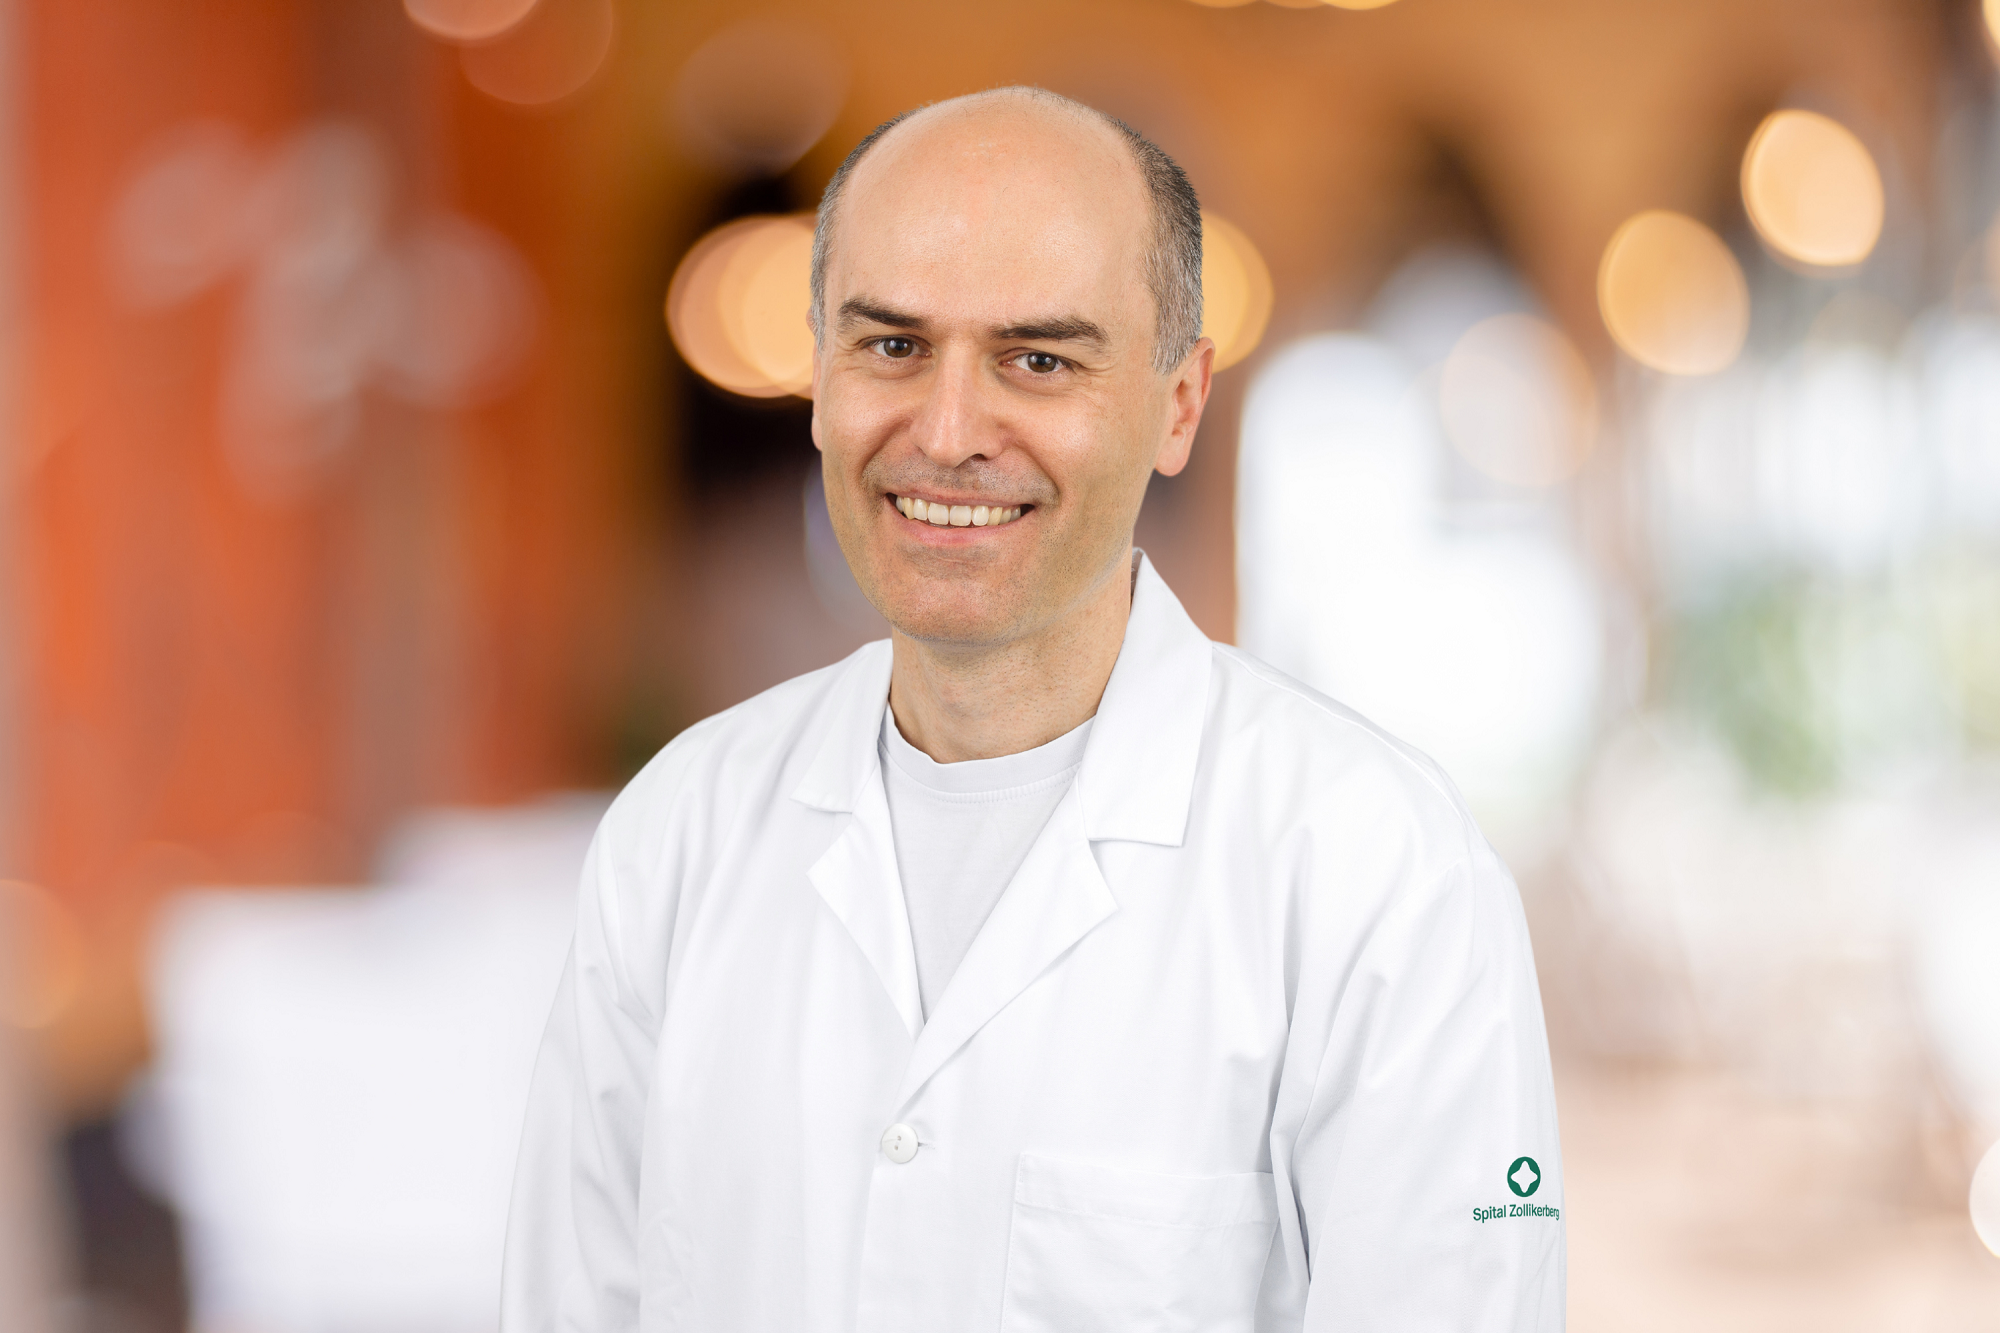 Smiling doctor in a white coat in front of a blurred background.